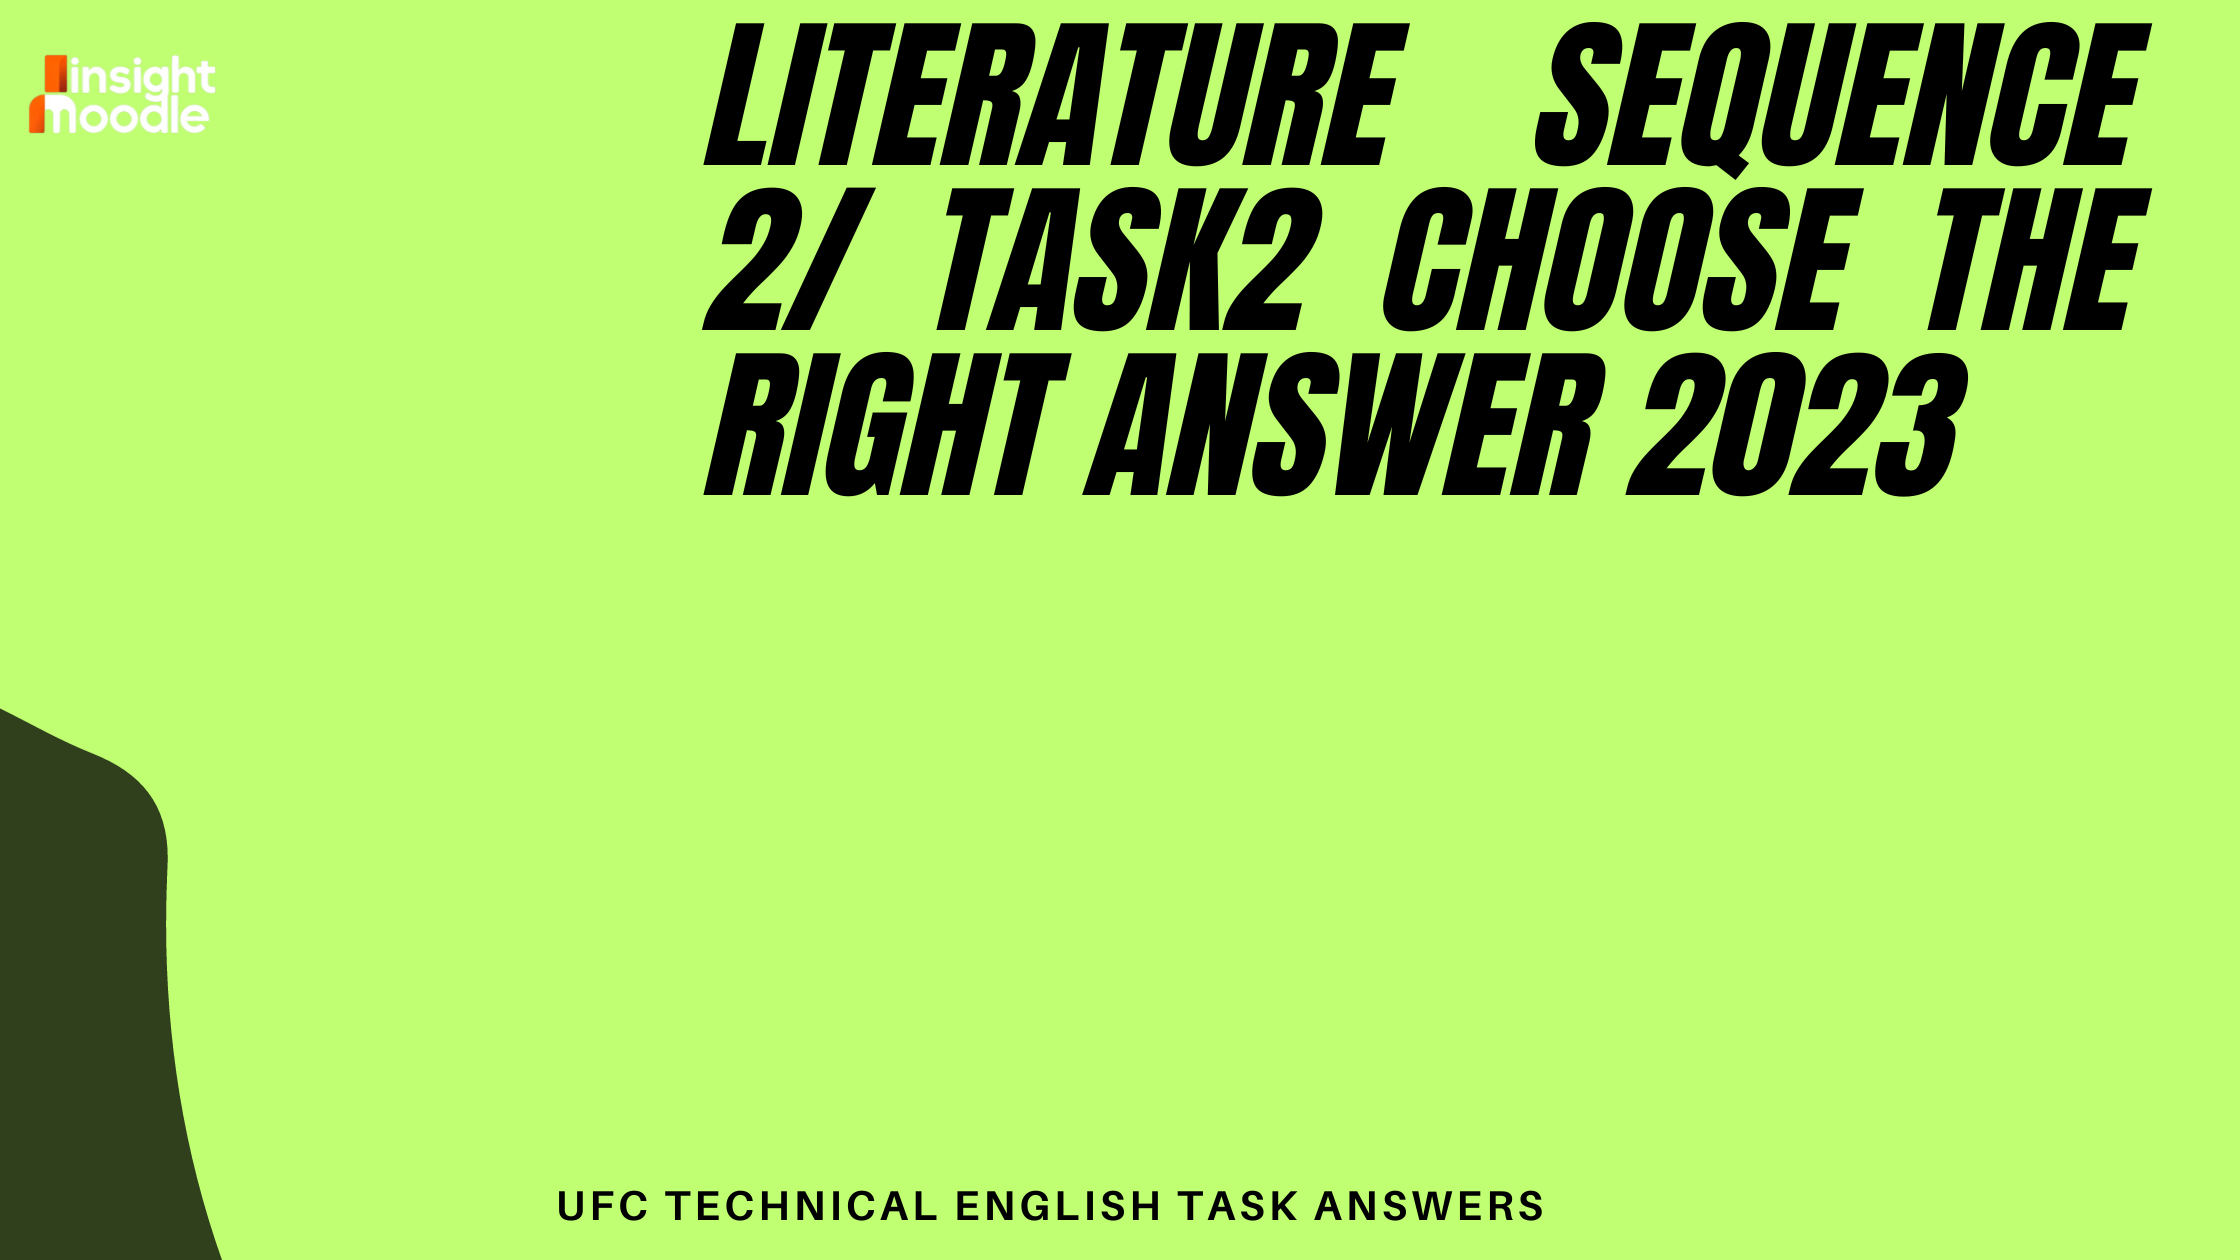 Study Skills sequence 2/ Task2 choose the right answer 2023